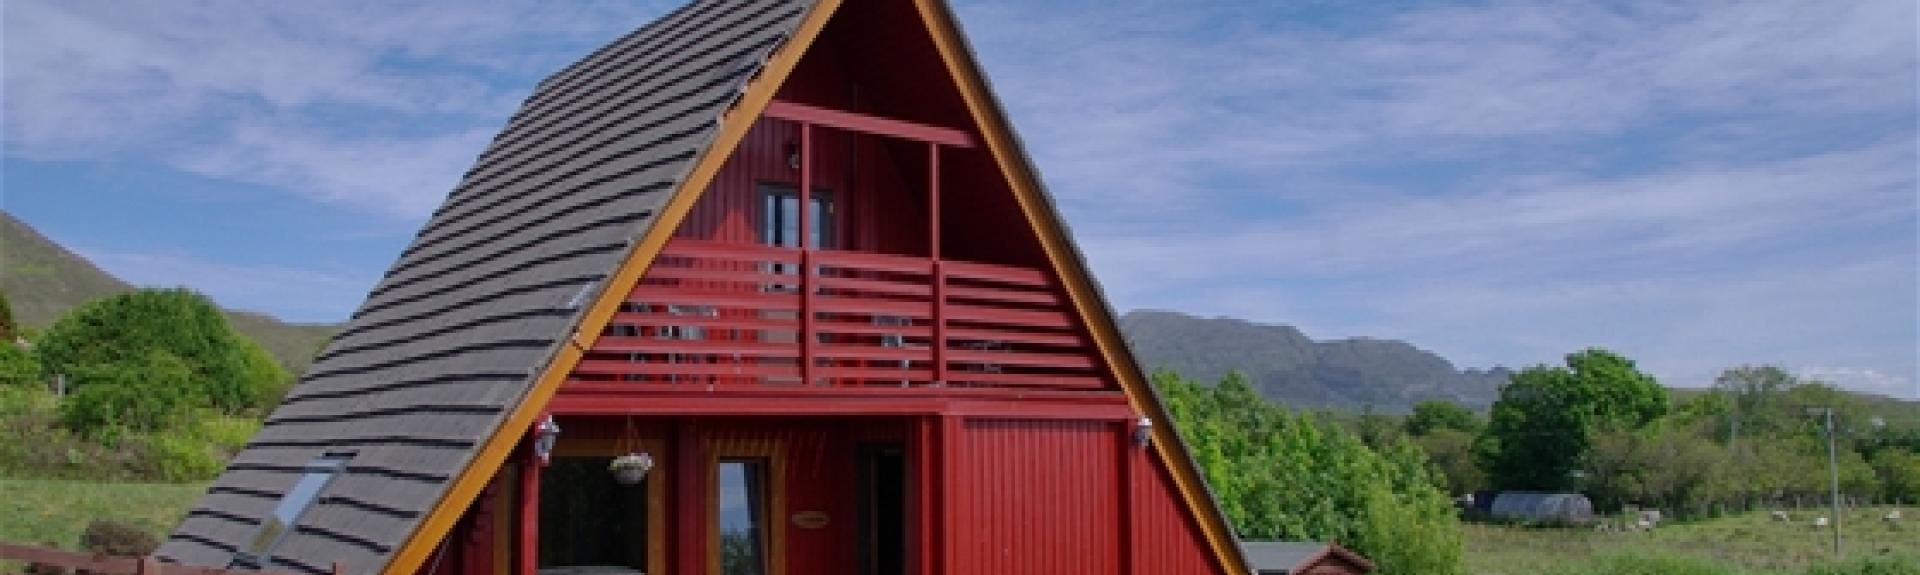 Exterior of a 2-storey, wooden A-Frame eco lodge surrounded by oprn countryside